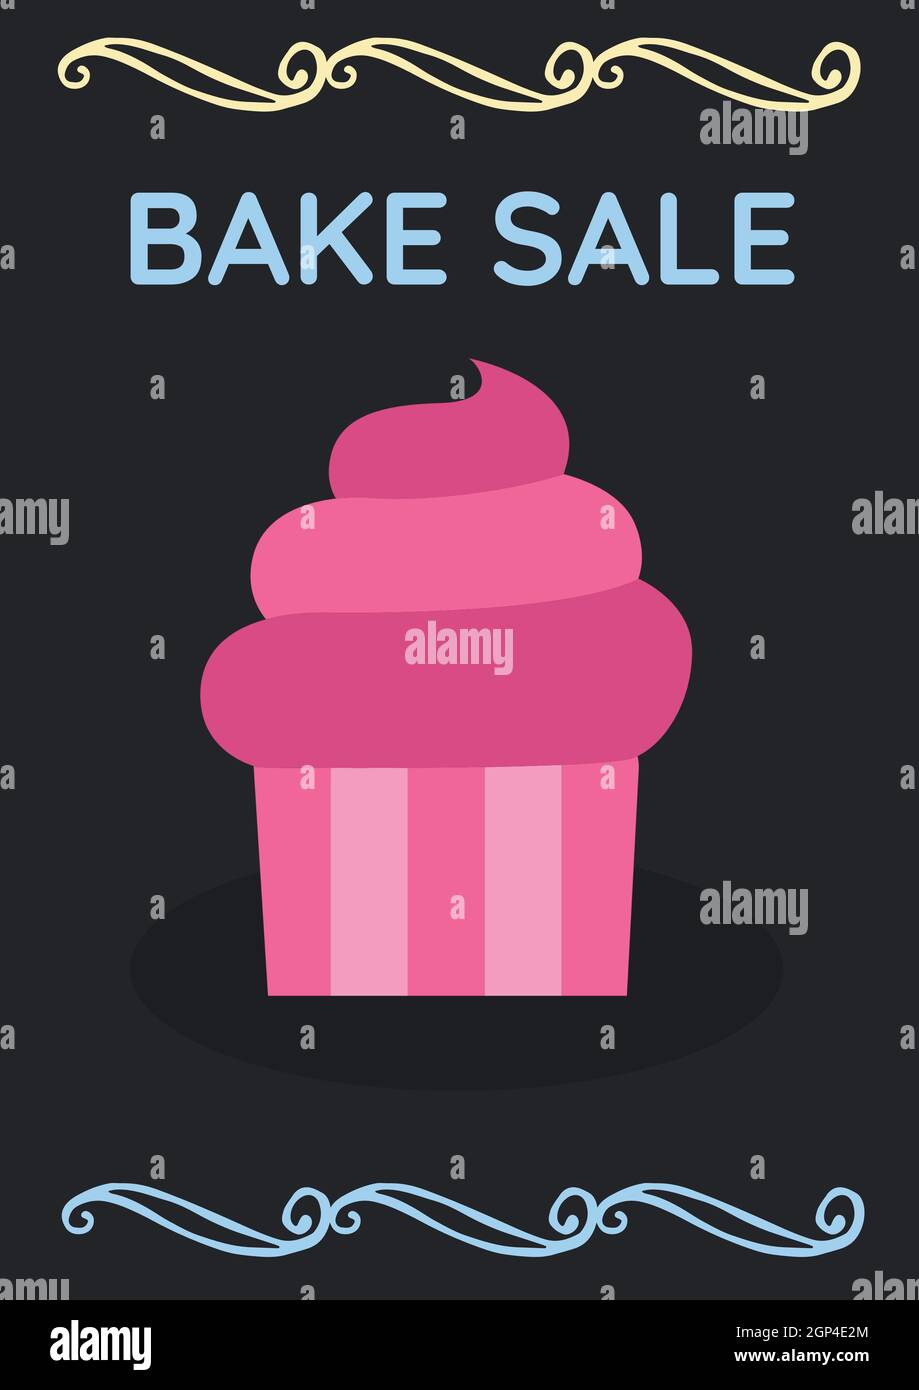 Composition of bake sale text and cupcake icon on black background Stock Photo